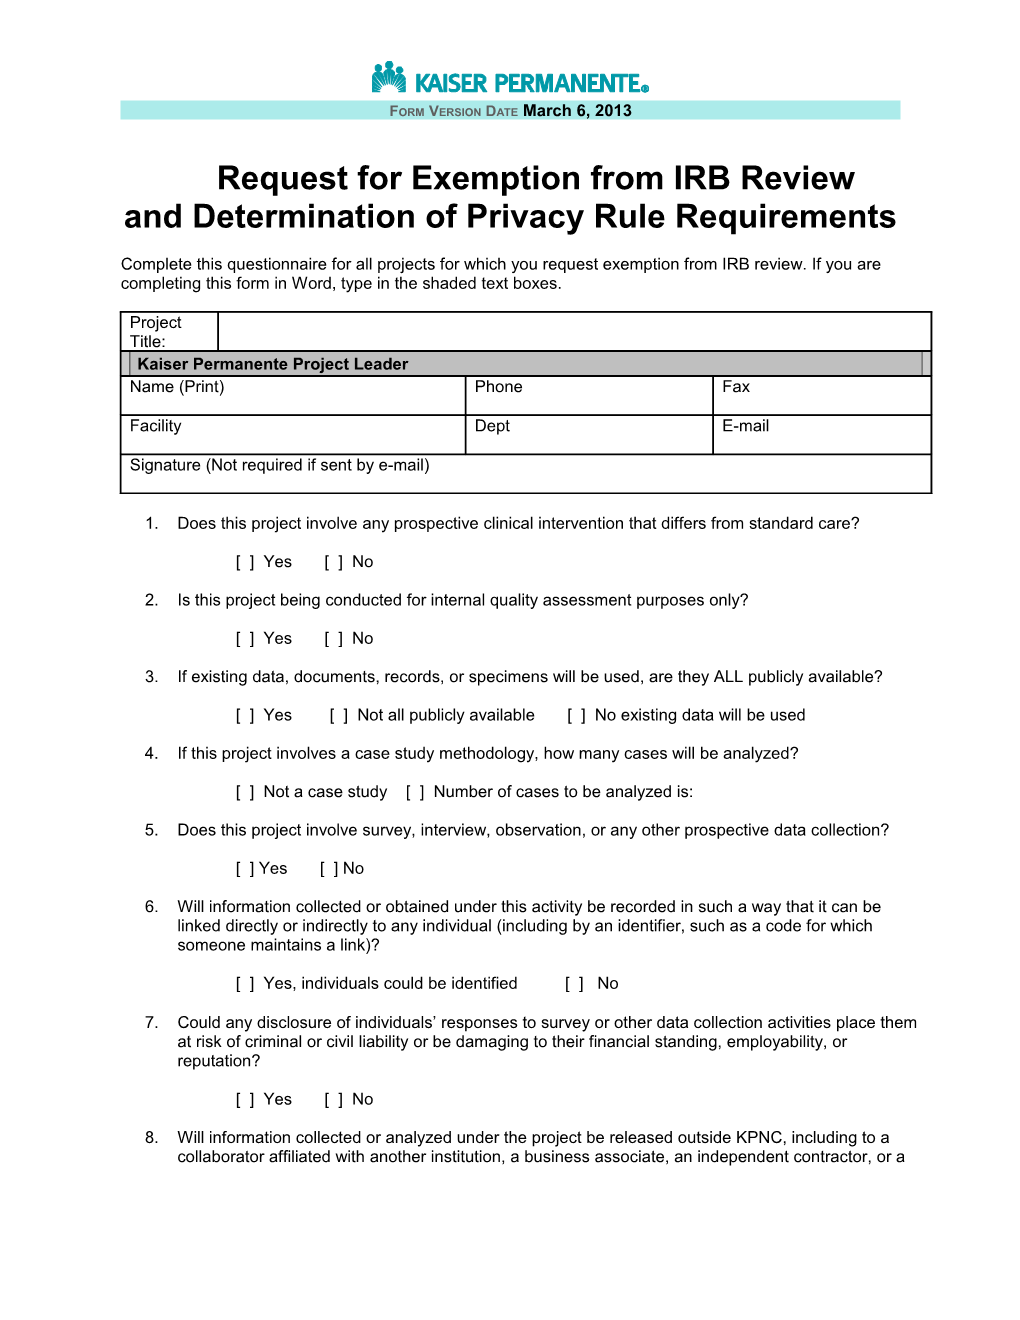 Request for Exemption from IRB Review